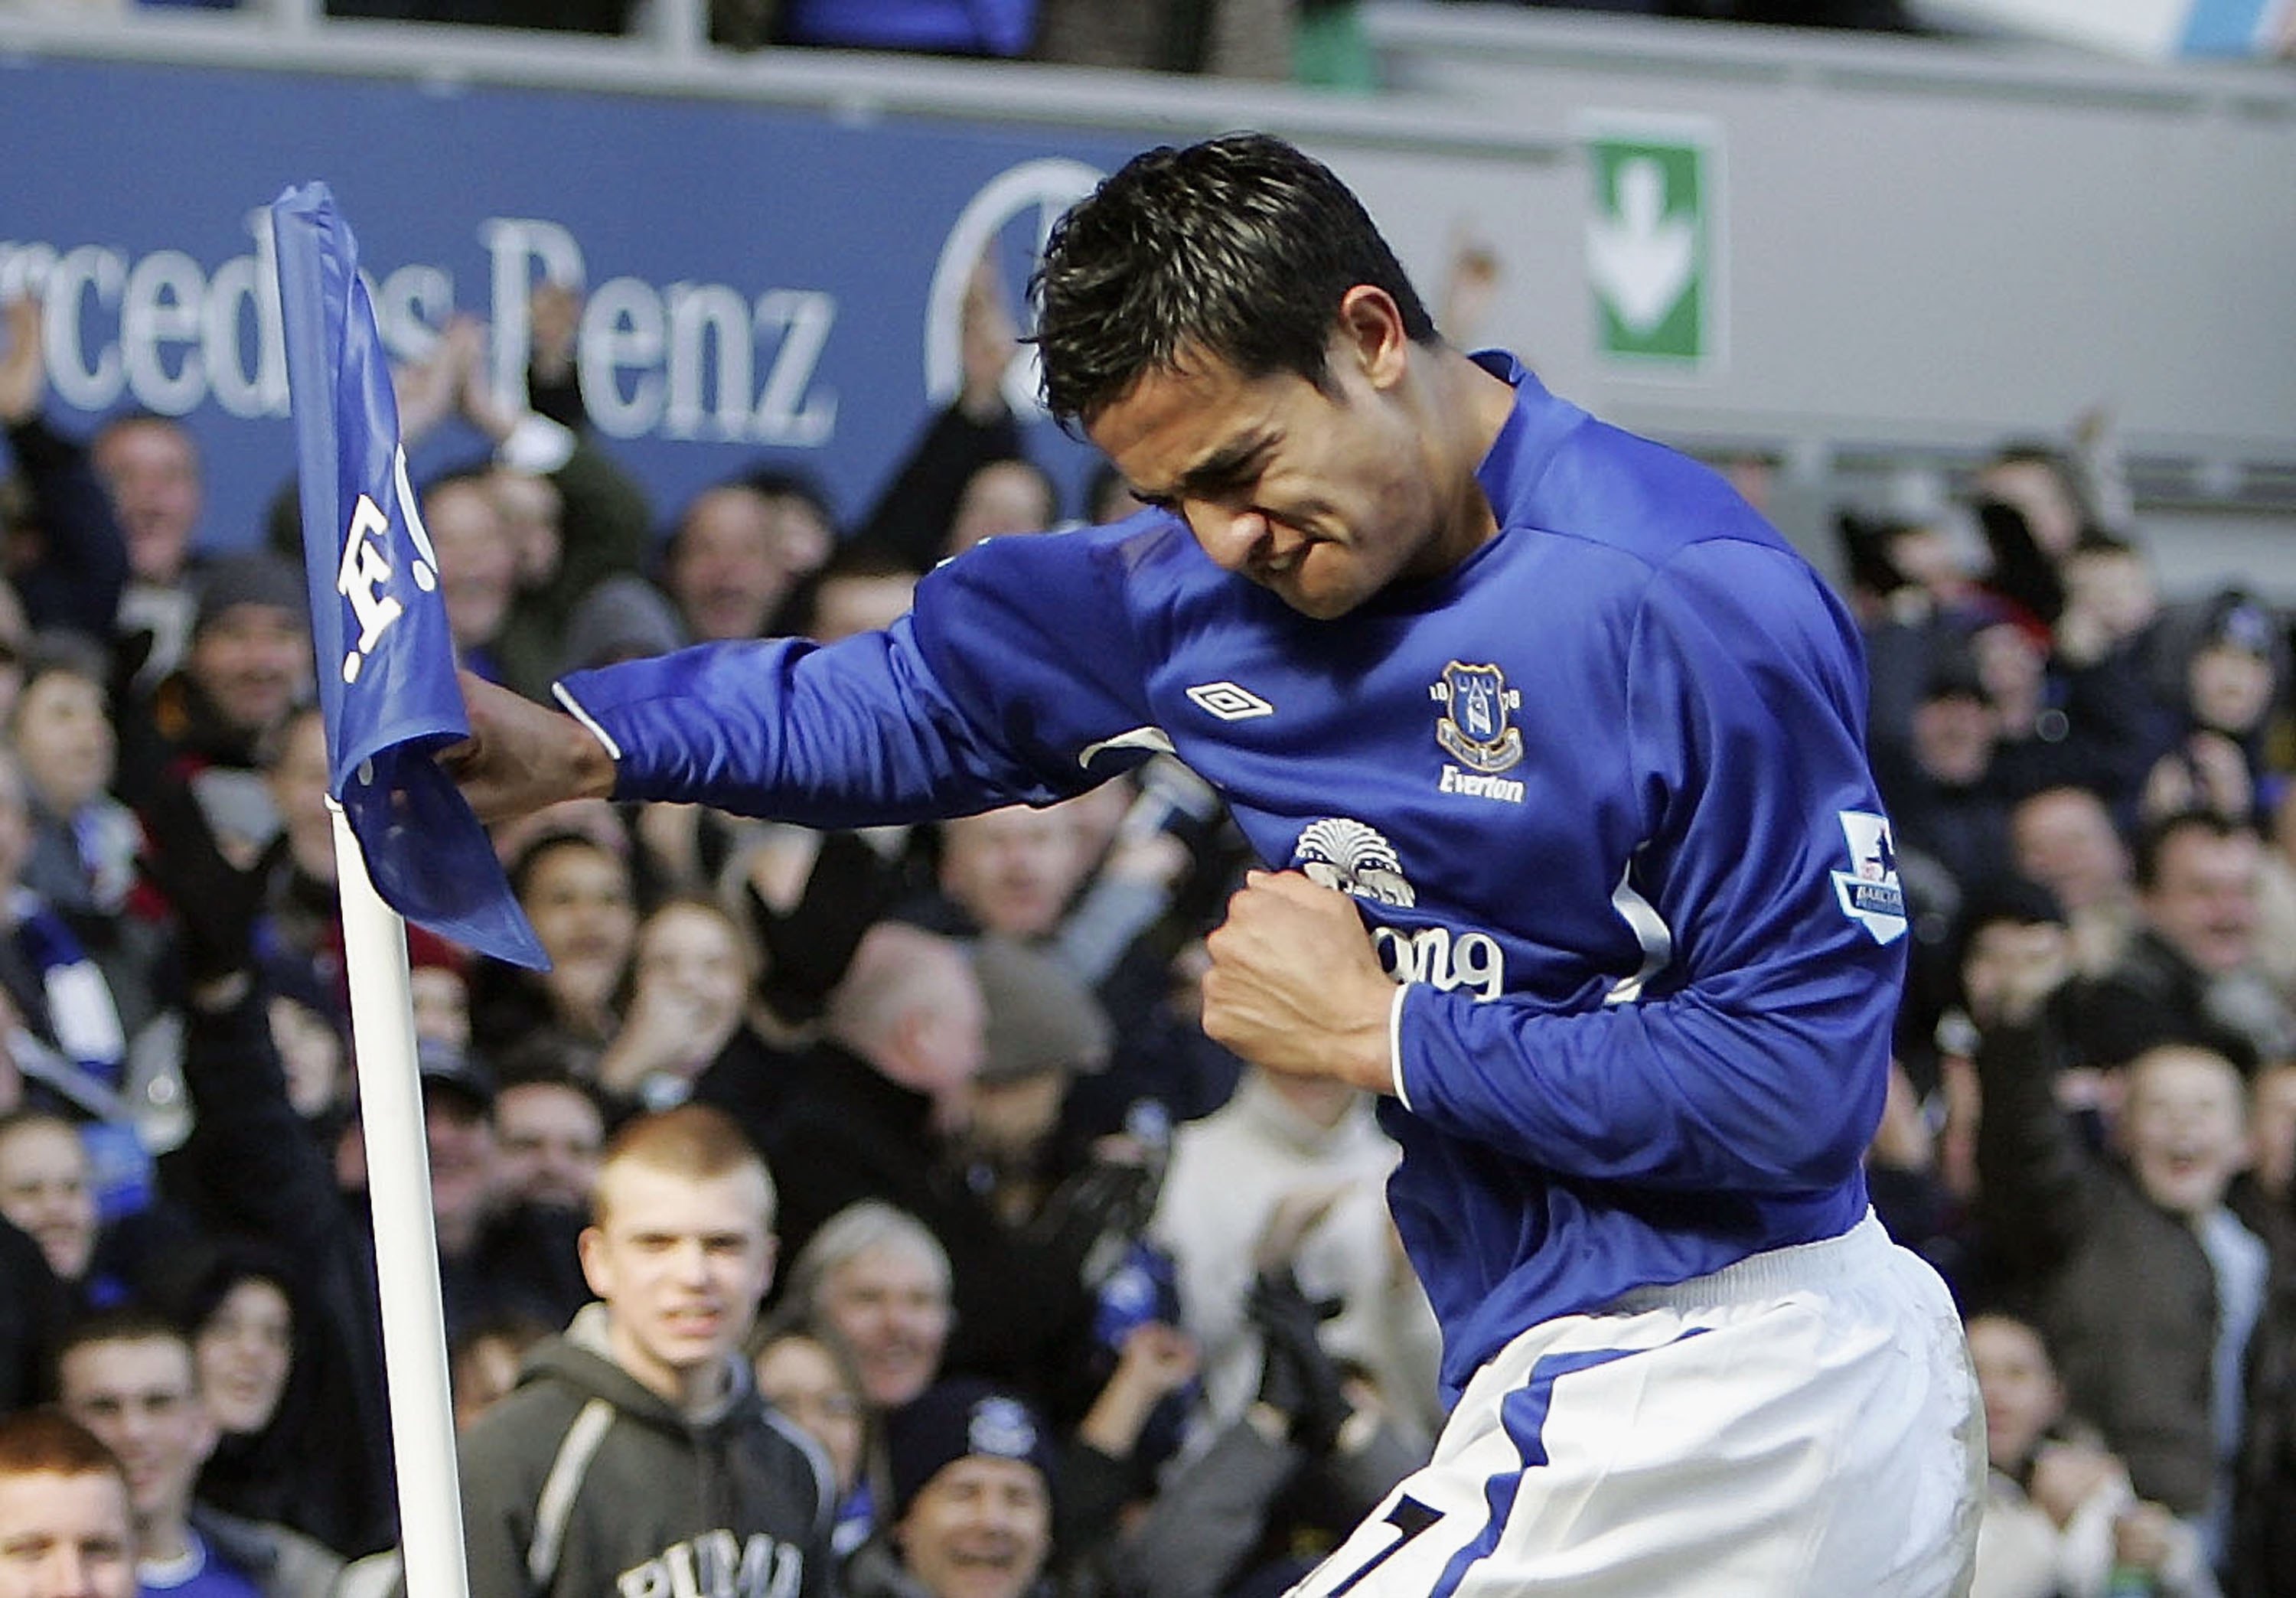 LIVERPOOL, UNITED KINGDOM - MARCH 18:  Tim Cahill of Everton celebrates scoring his first goal by boxing the corner flag during the Barclays Premiership match between Everton and Aston Villa at Goodison Park on March 18, 2006 in Liverpool, England.  (Phot